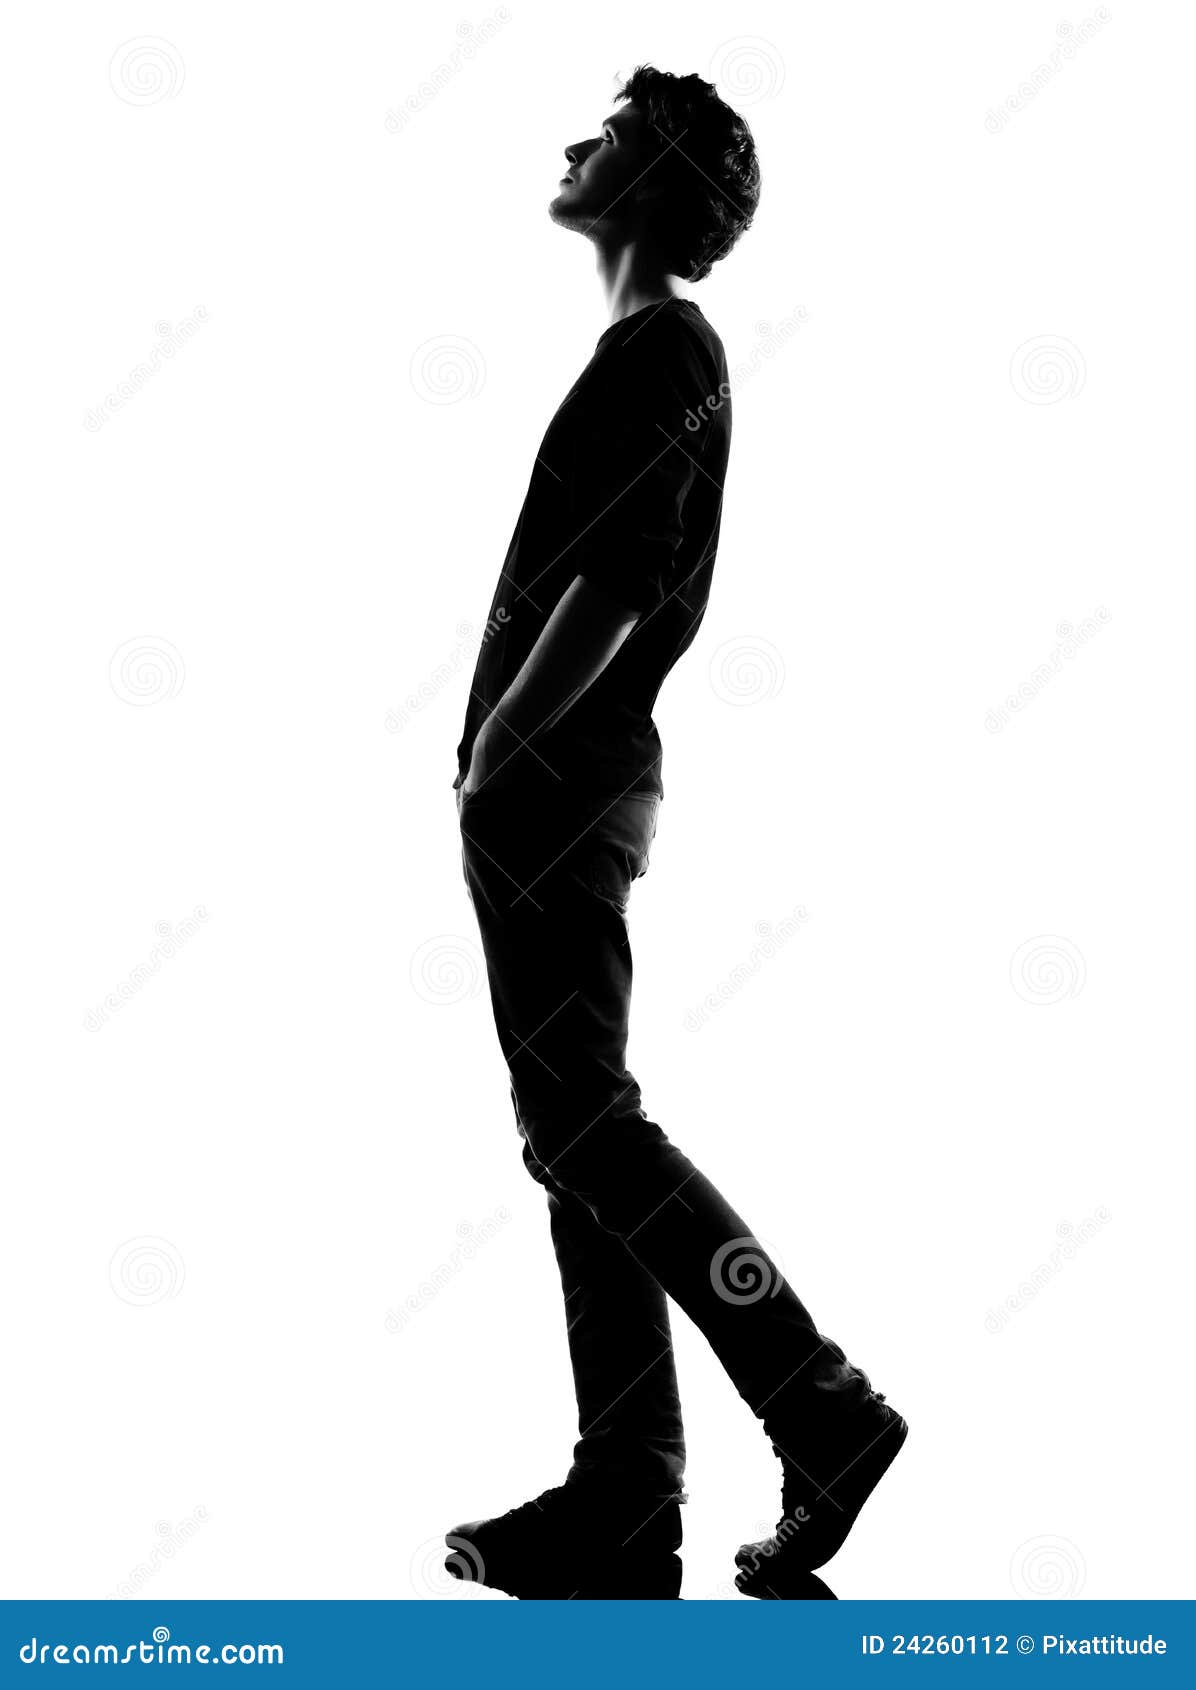 young man silhouette walking looking up